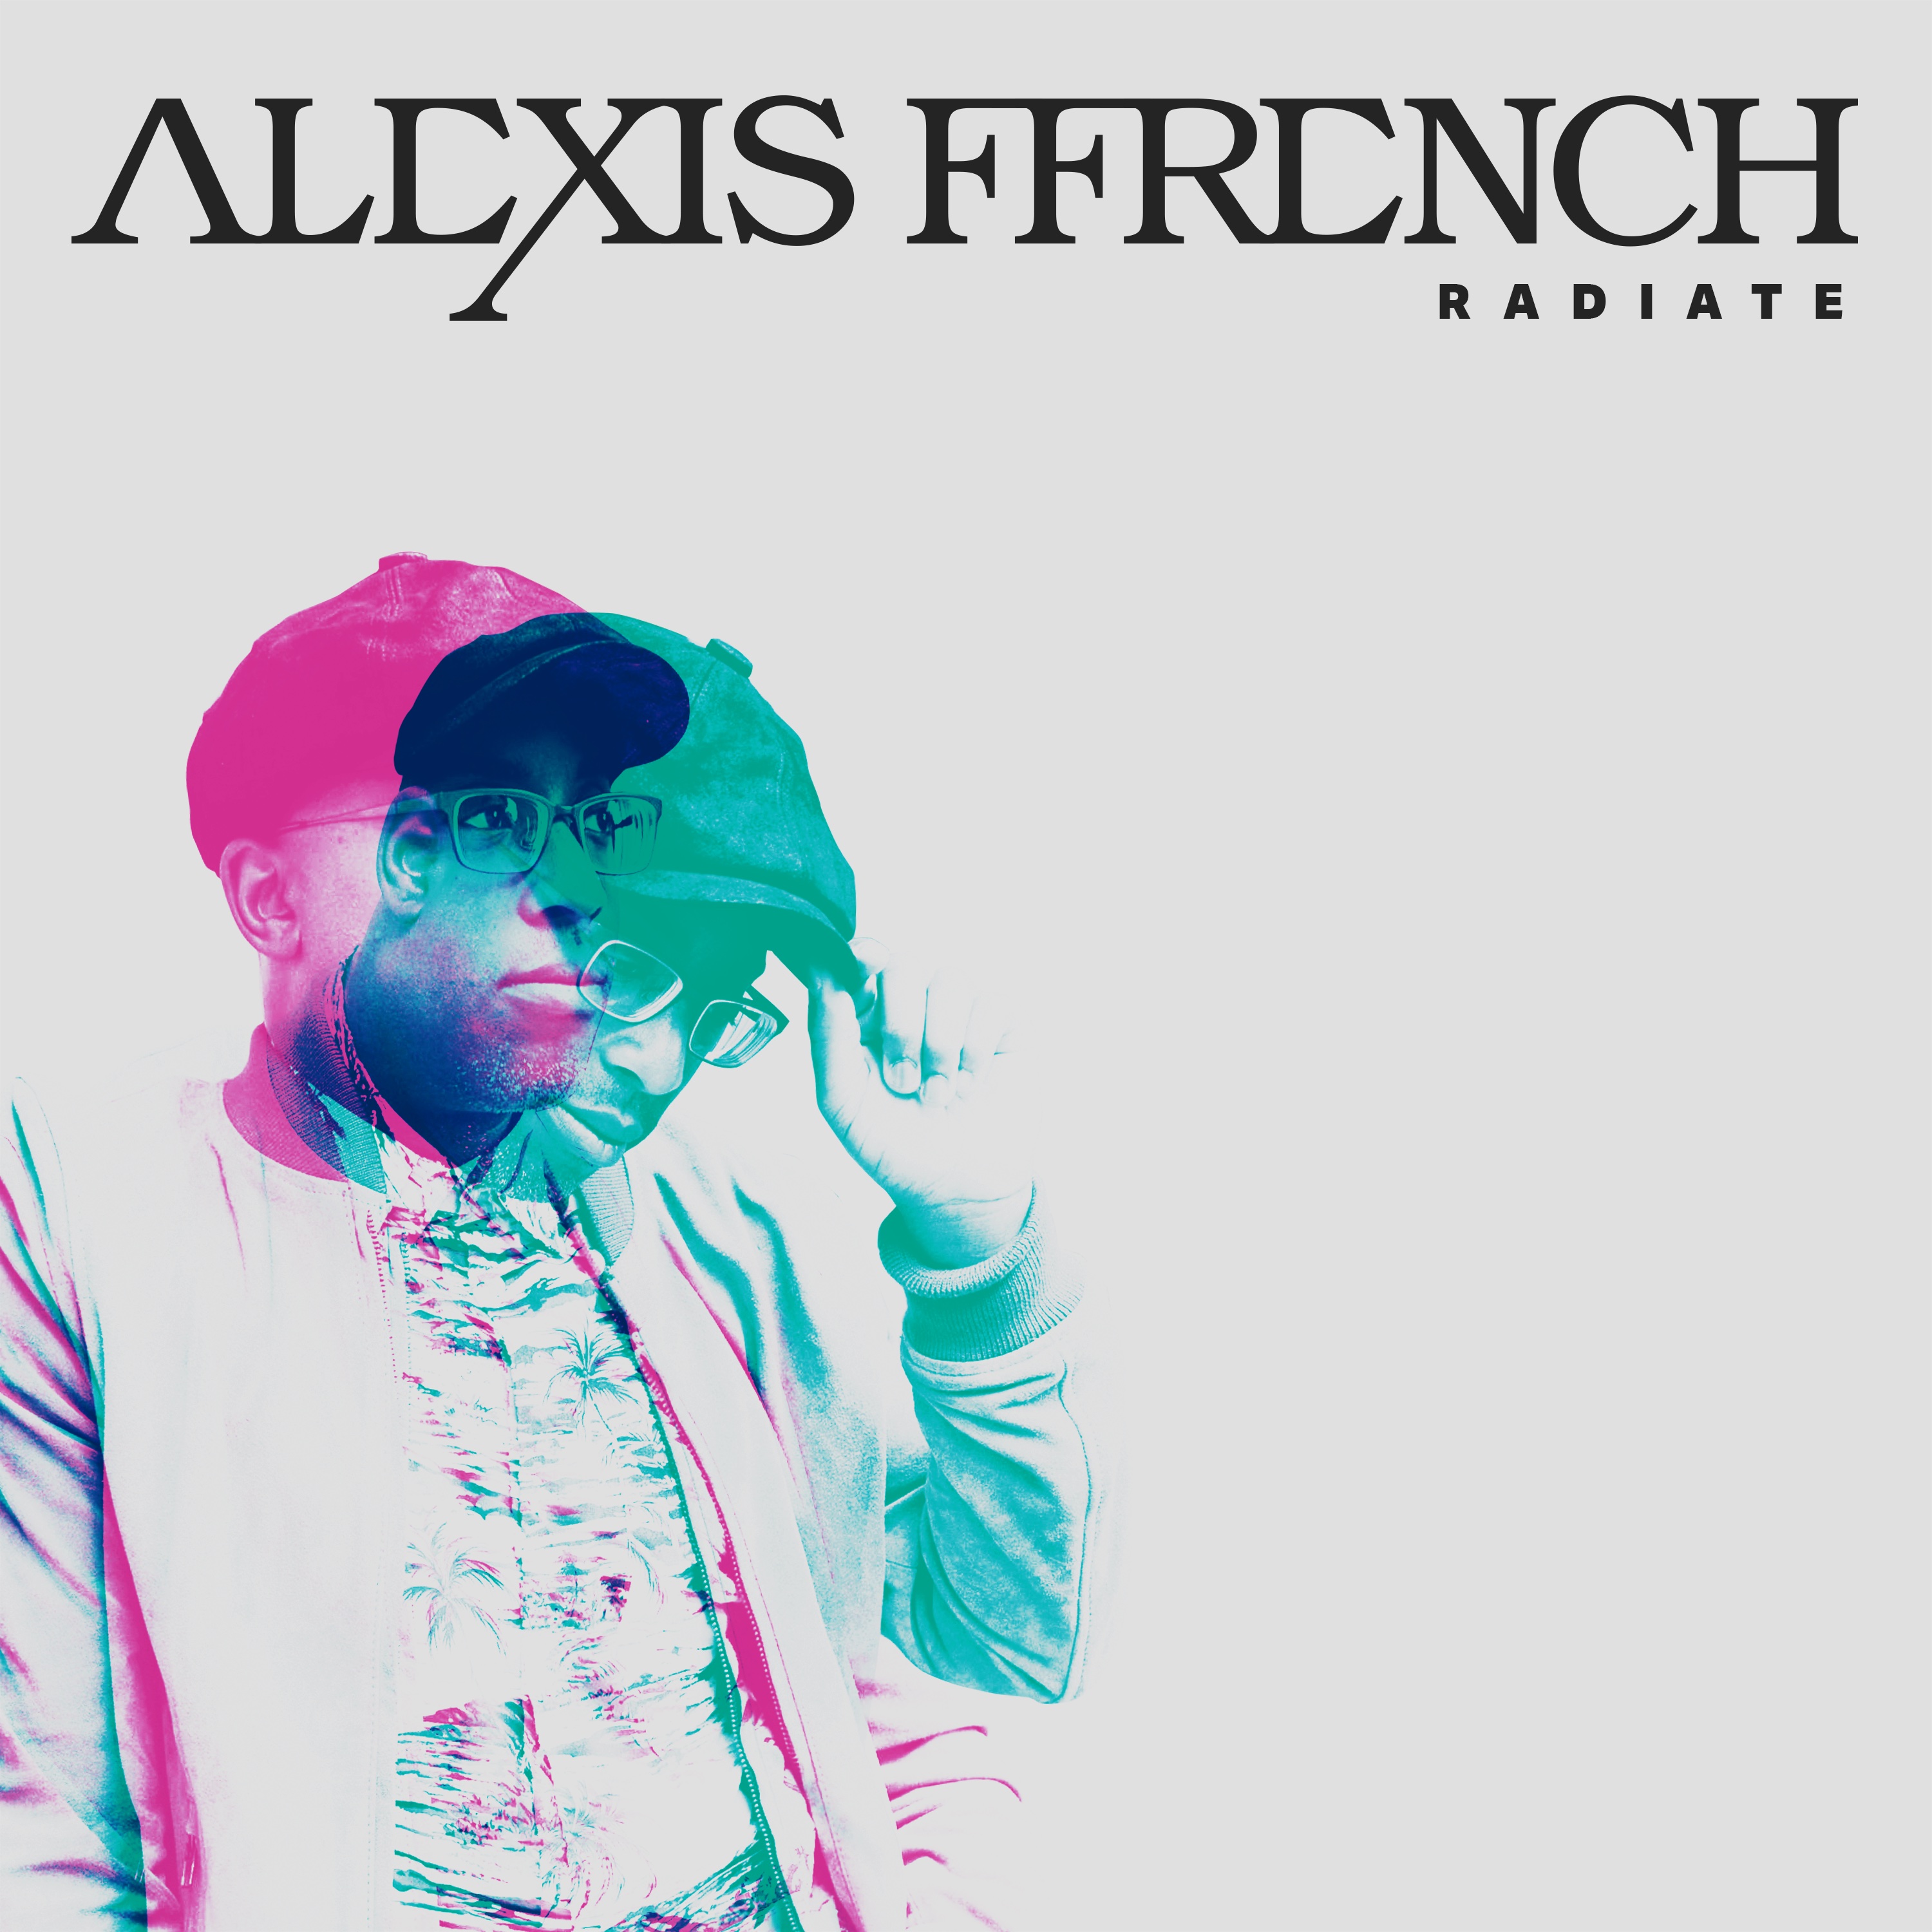 Alexis Ffrench - Radiate